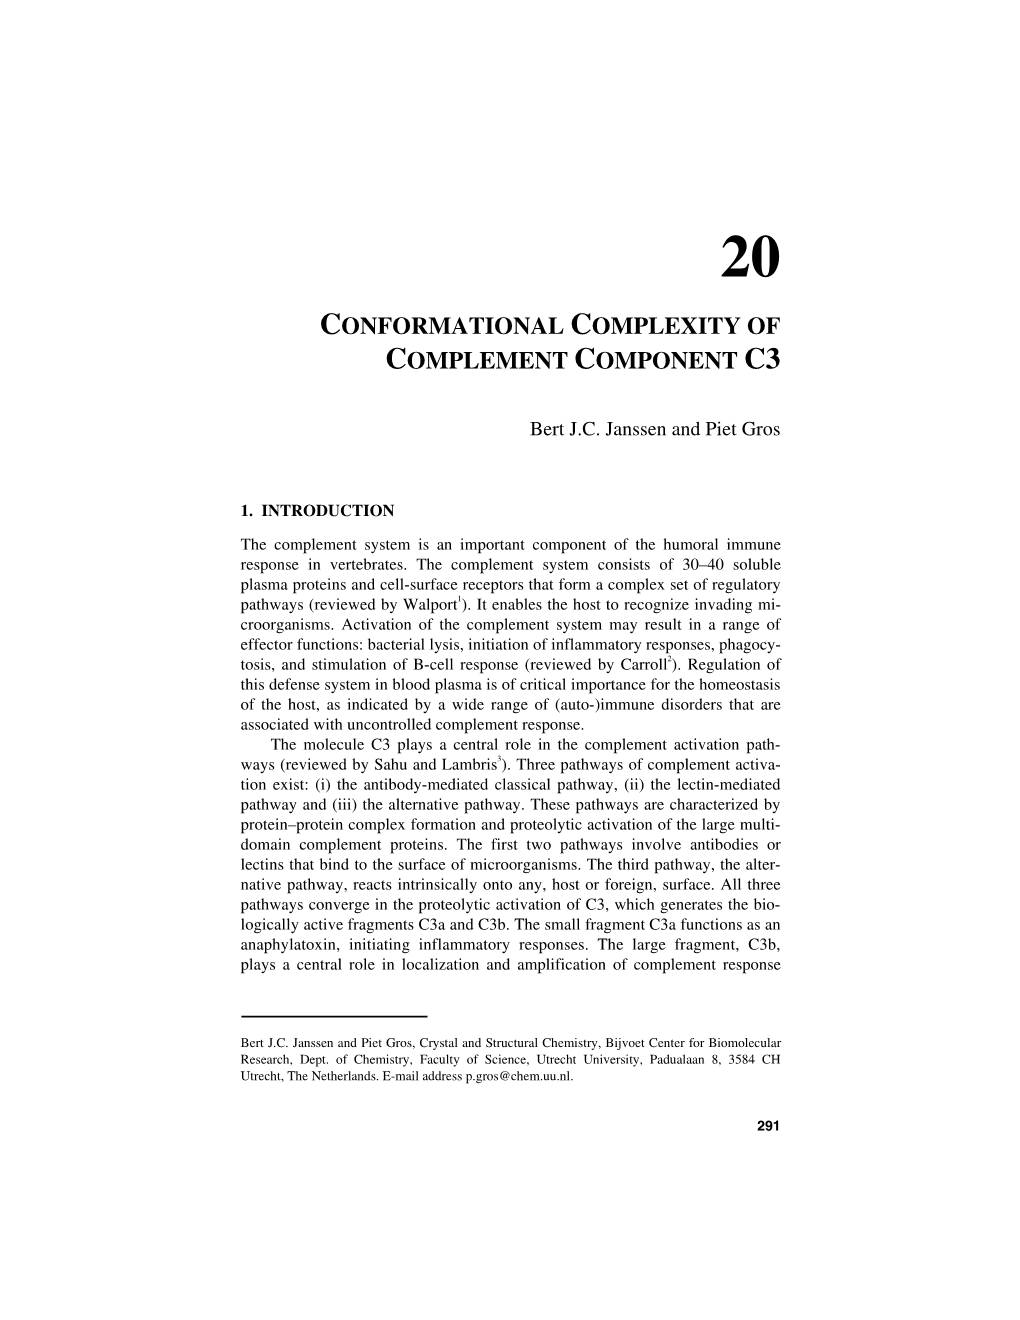 Conformational Complexity of Complement Component C3